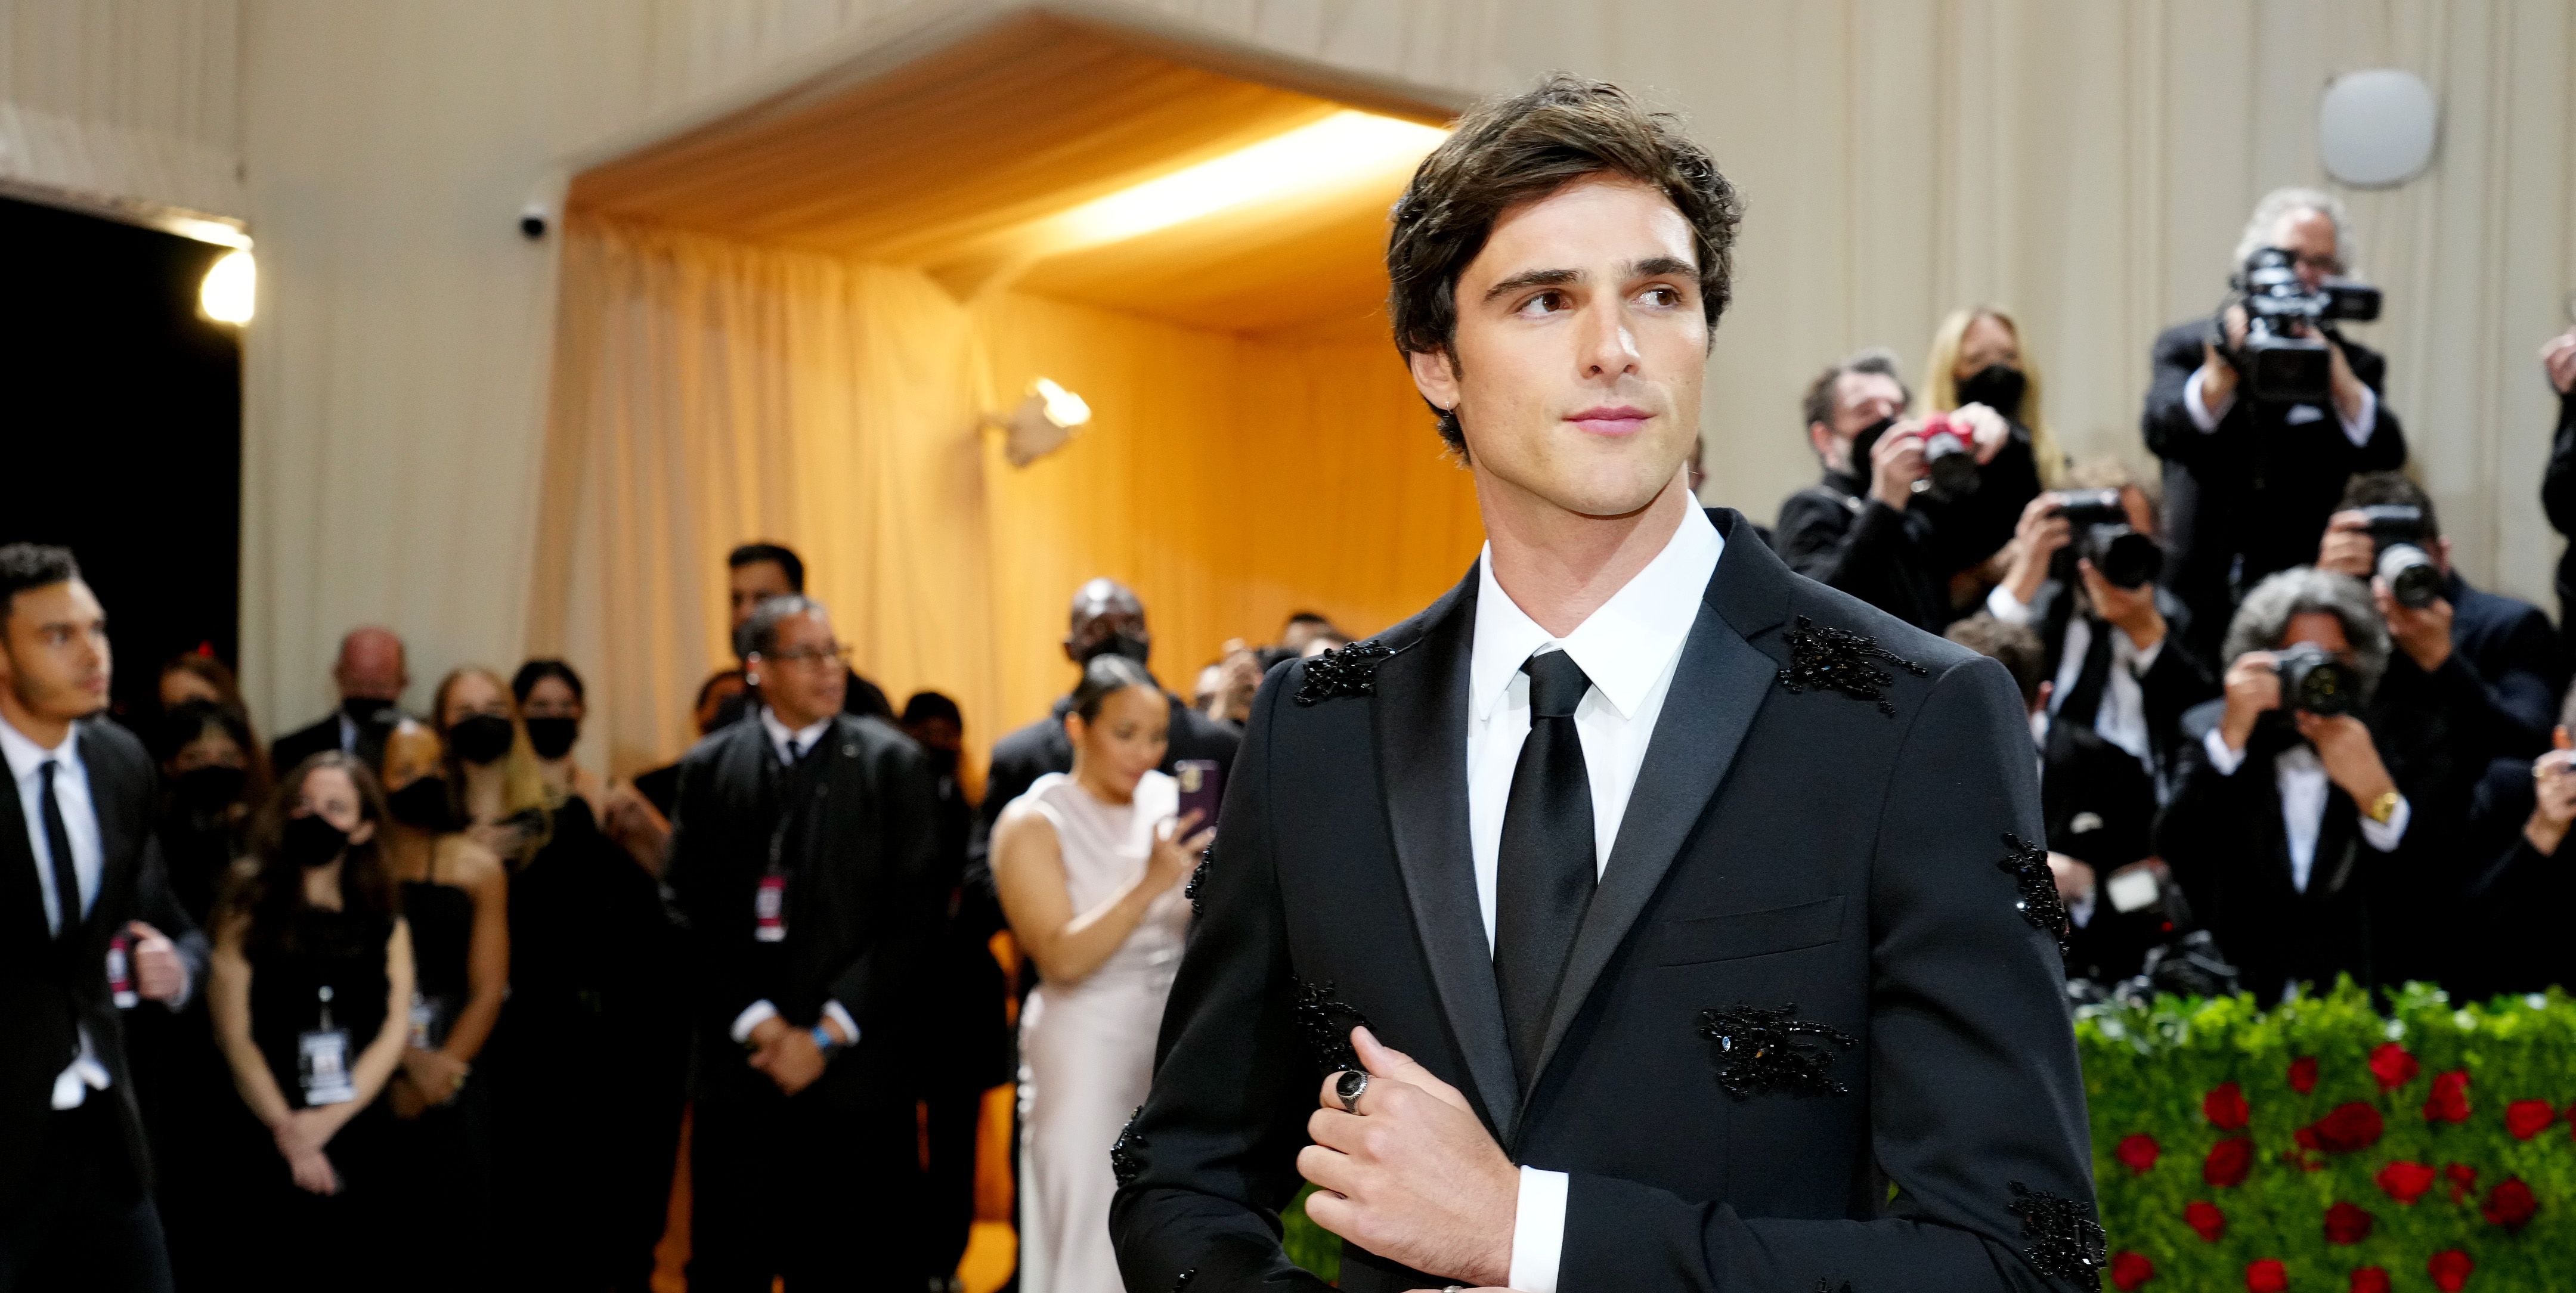 Jacob Elordi Used an $18 Pomade for the Met Gala - Trendradars Latest